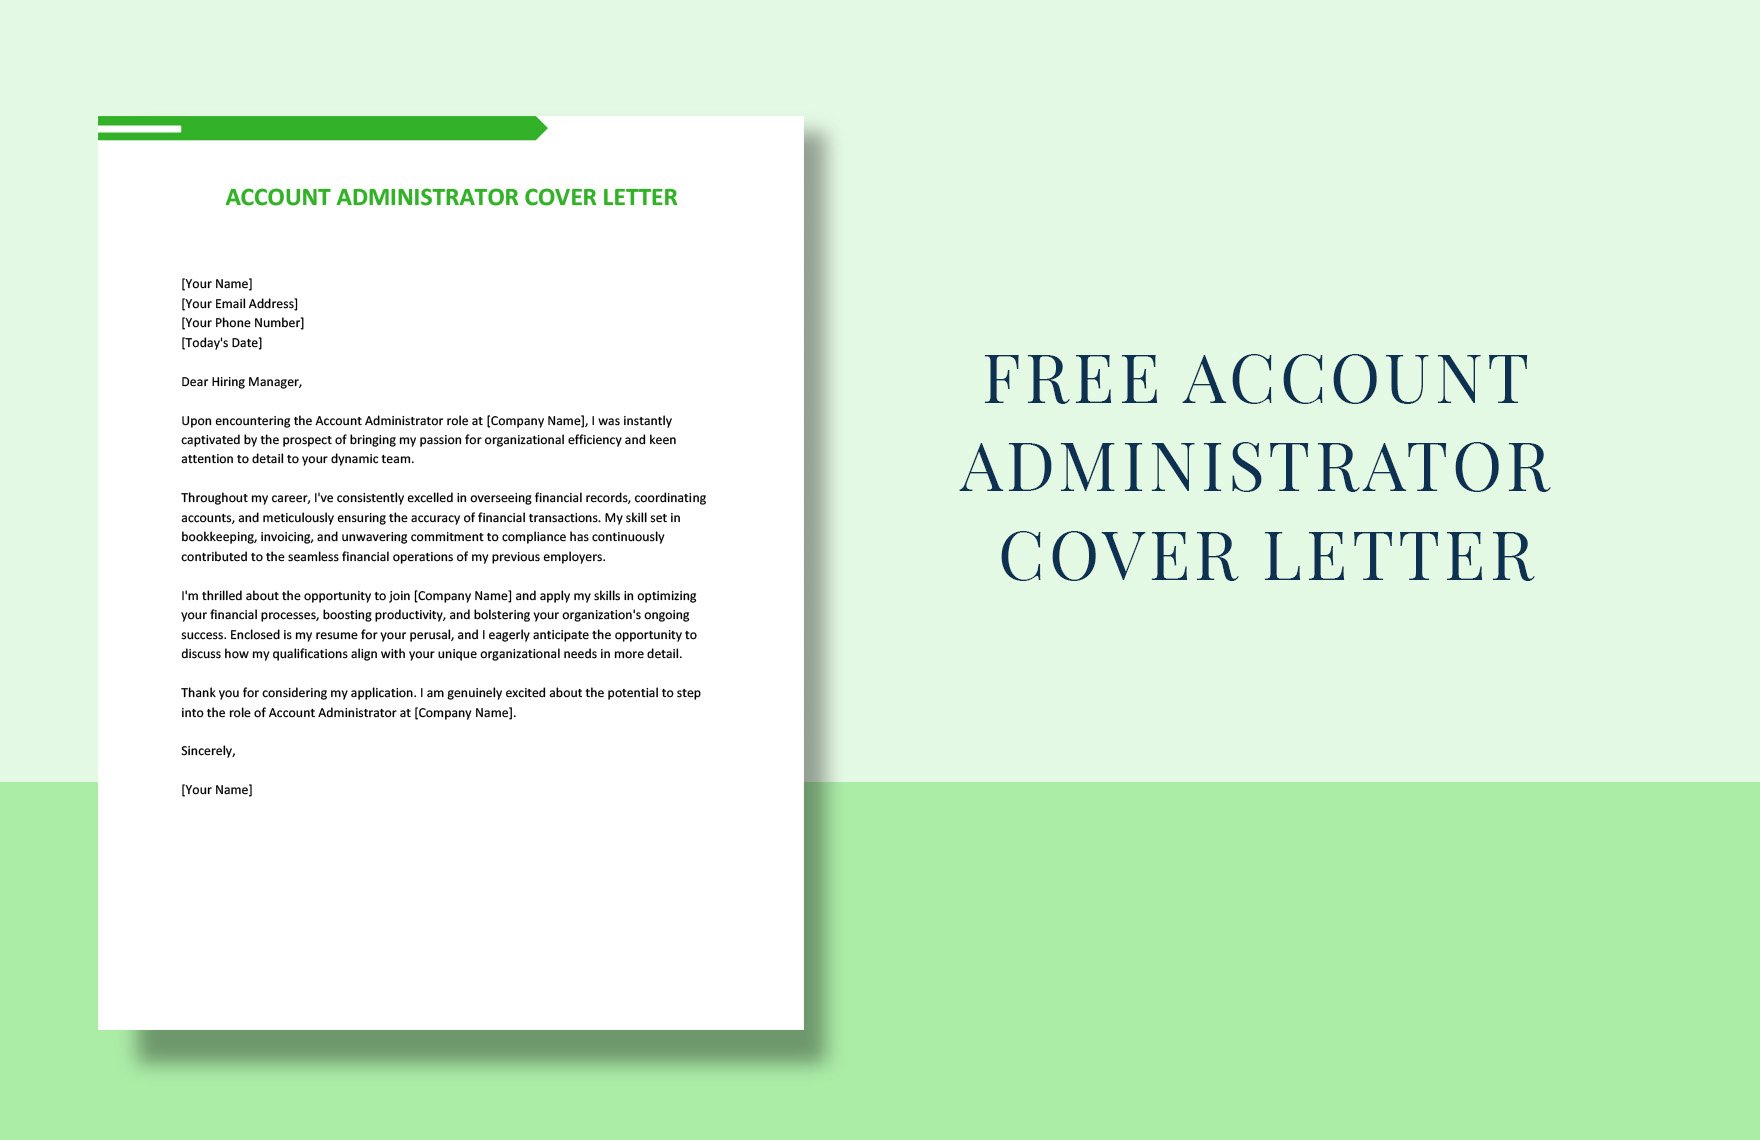 Account Administrator Cover Letter in Word, Google Docs